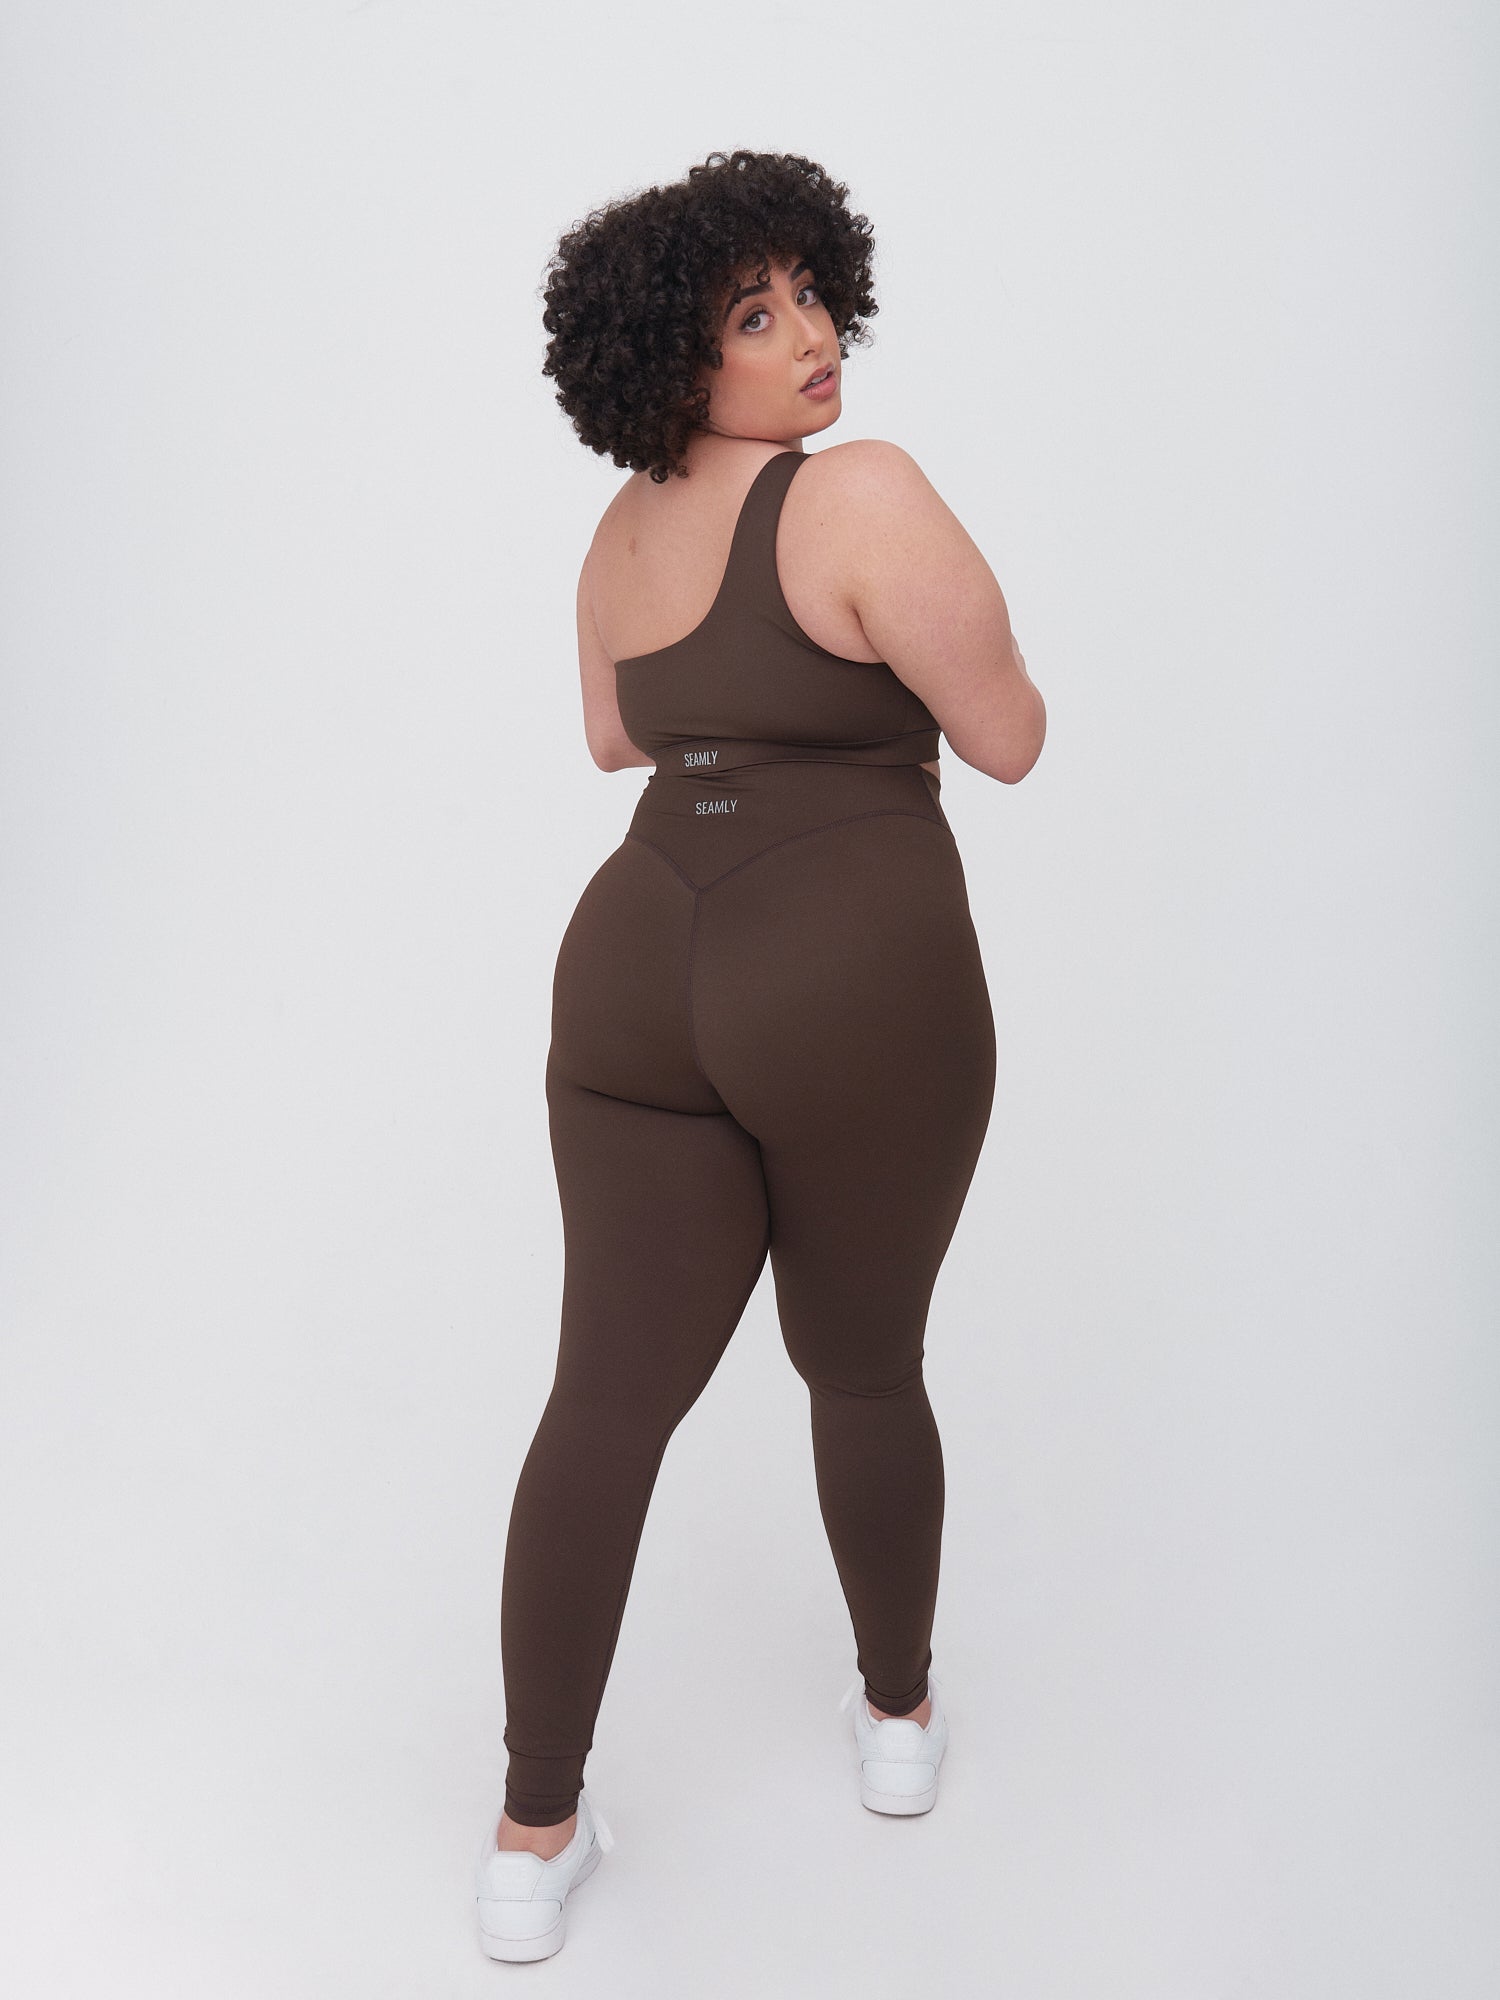 Women's Plus Size Super-stretch Solid Leggings Brown One Size Fits